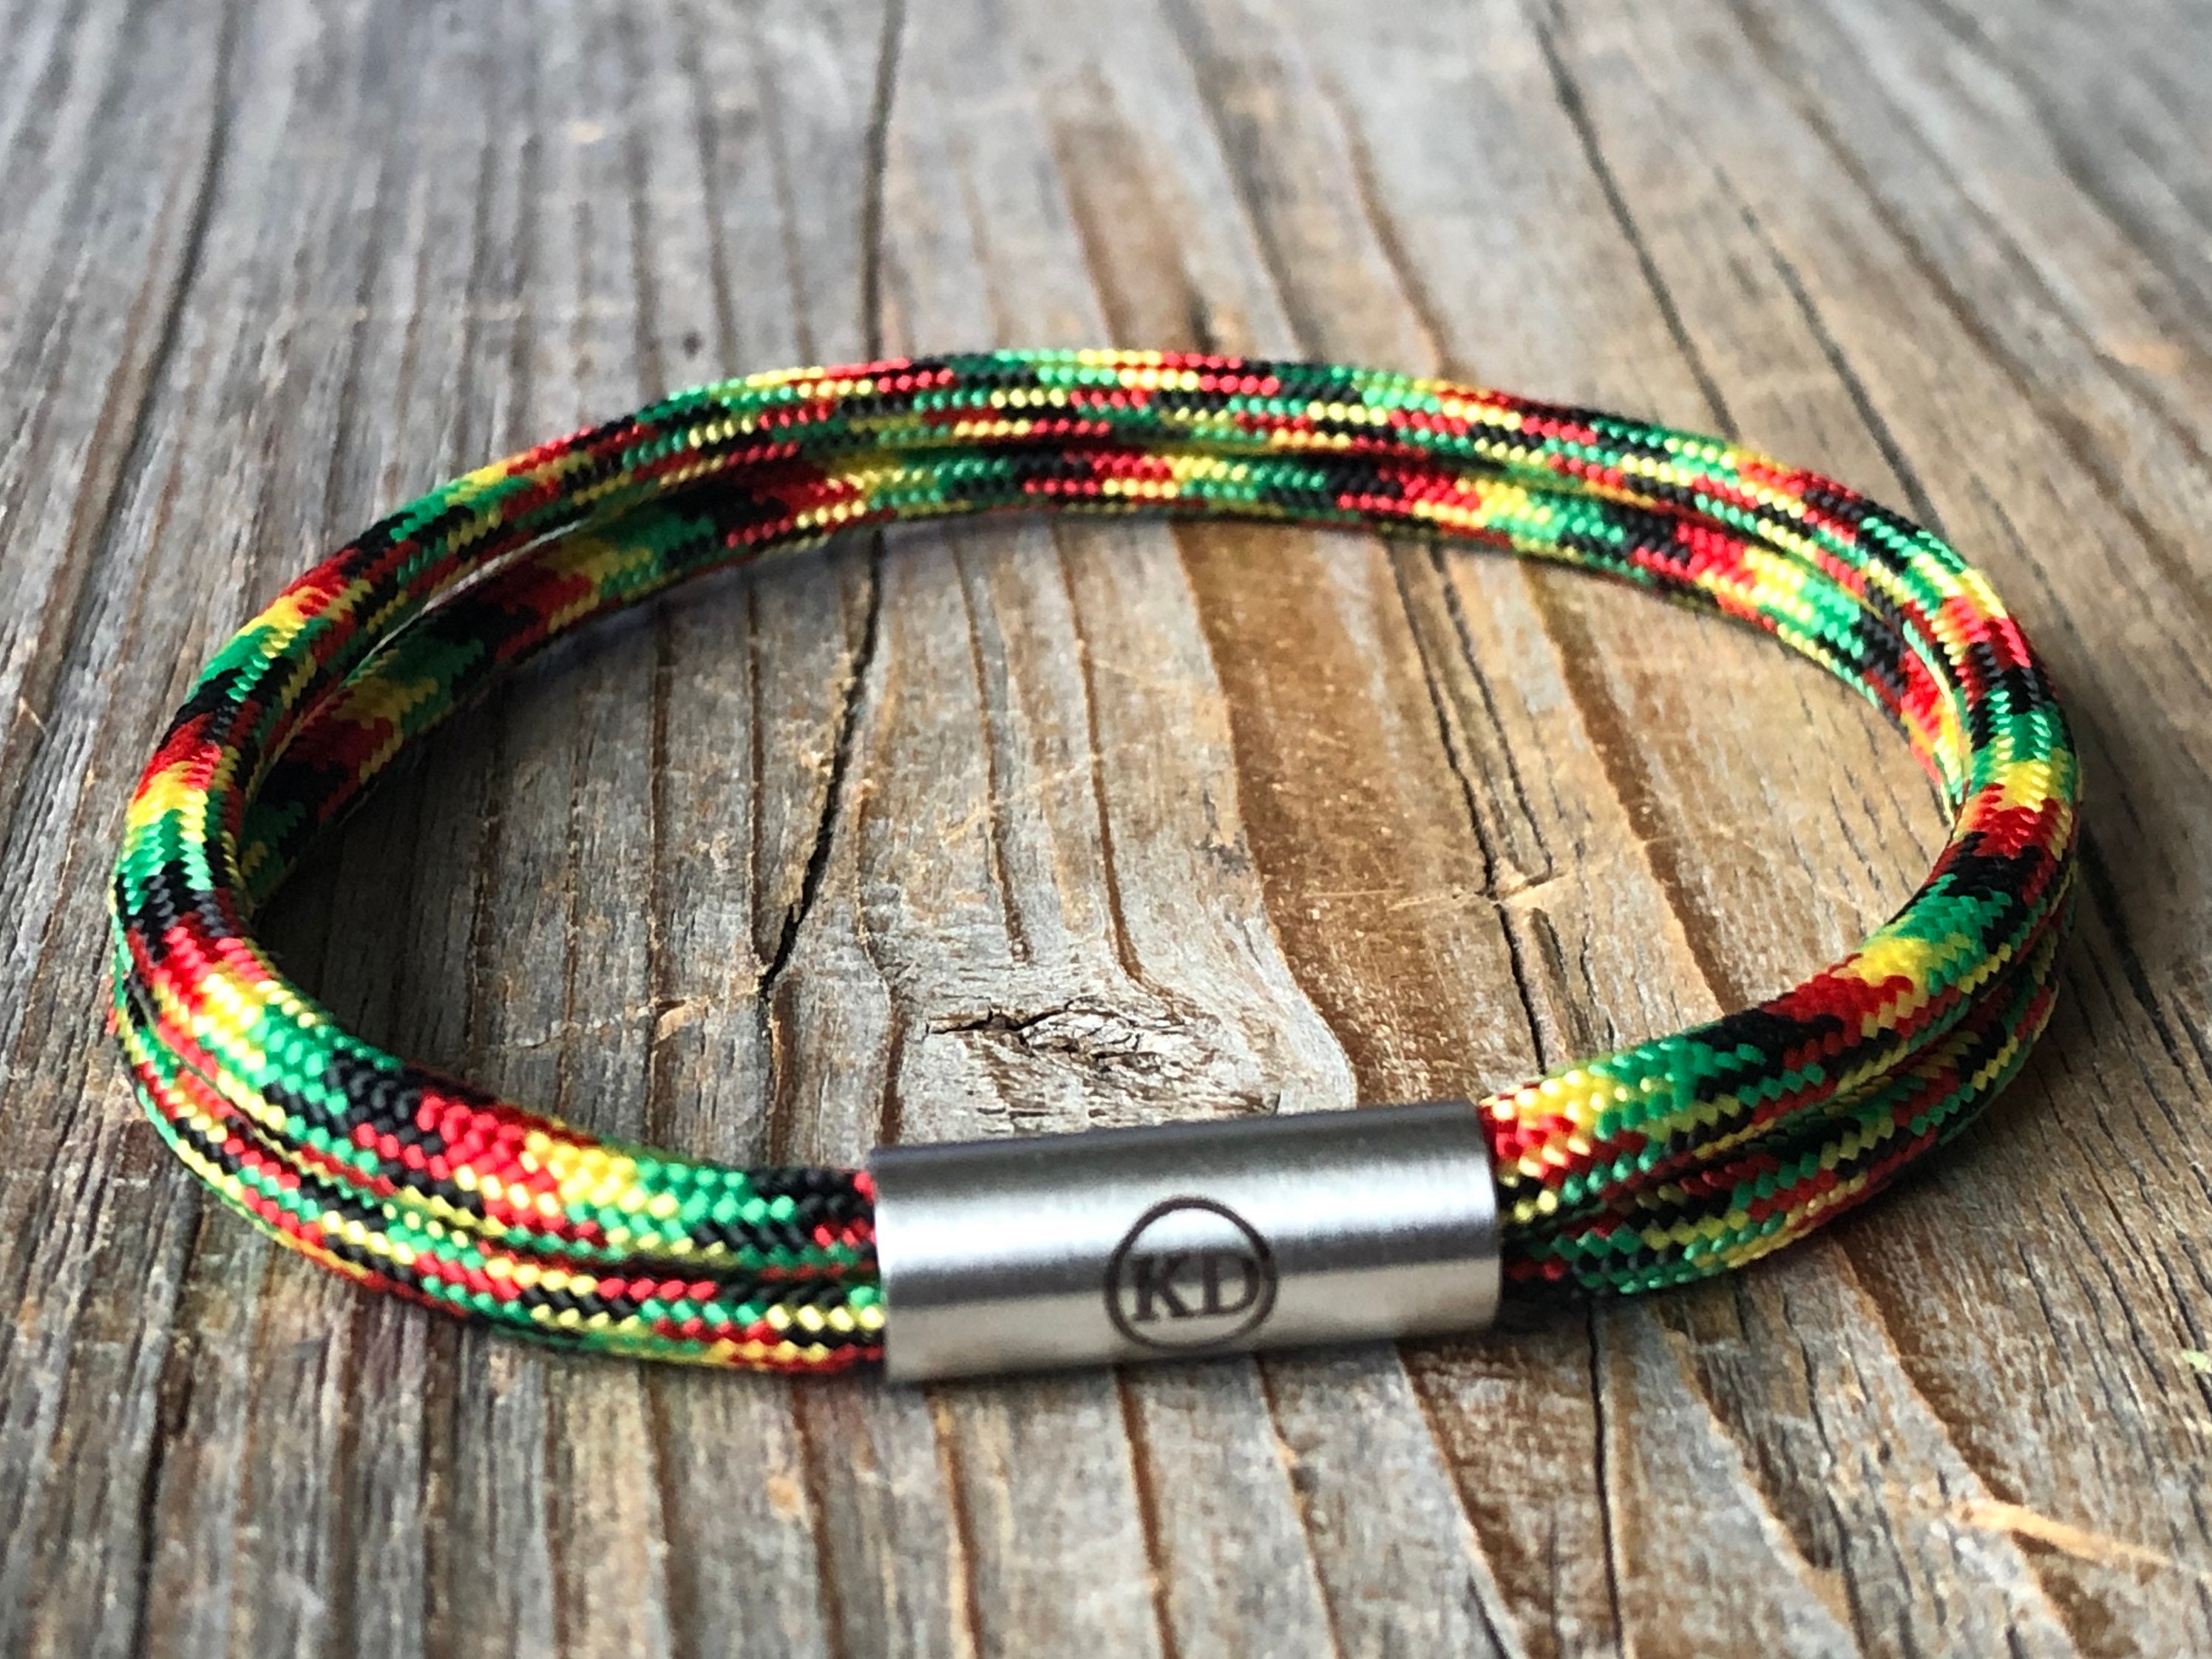 Online Class: Kids Club: Let's Make Glow in the Dark Paracord